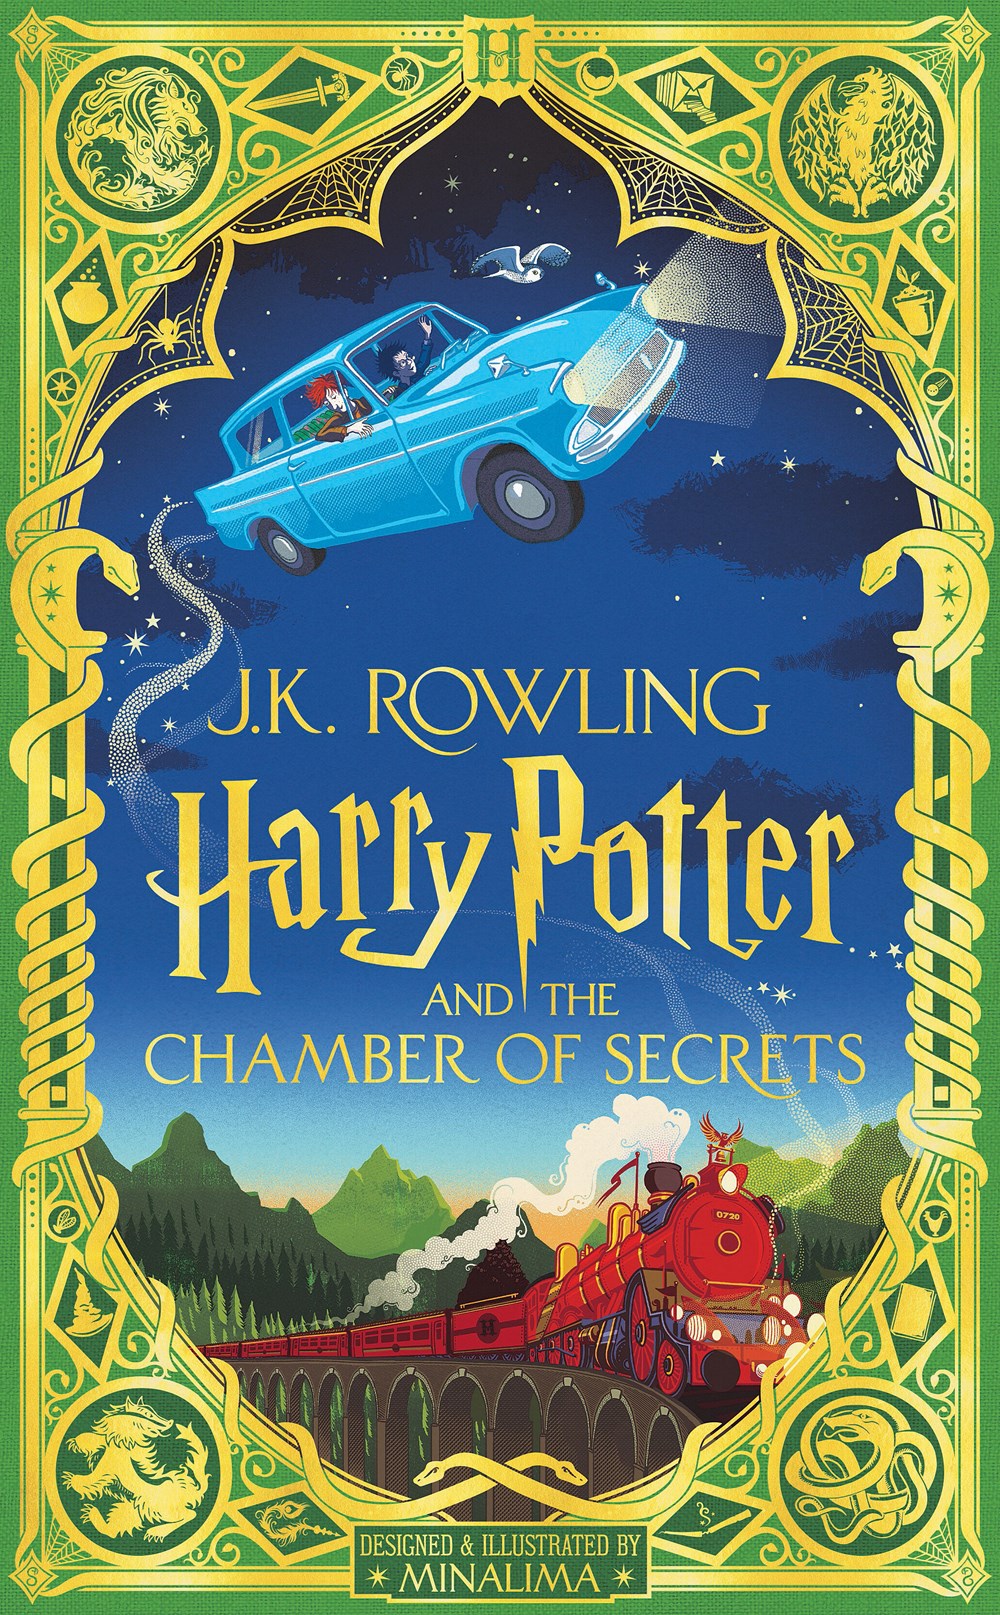 Sneak peek into MinaLima's illustrated Harry Potter and the Chamber of  Secrets